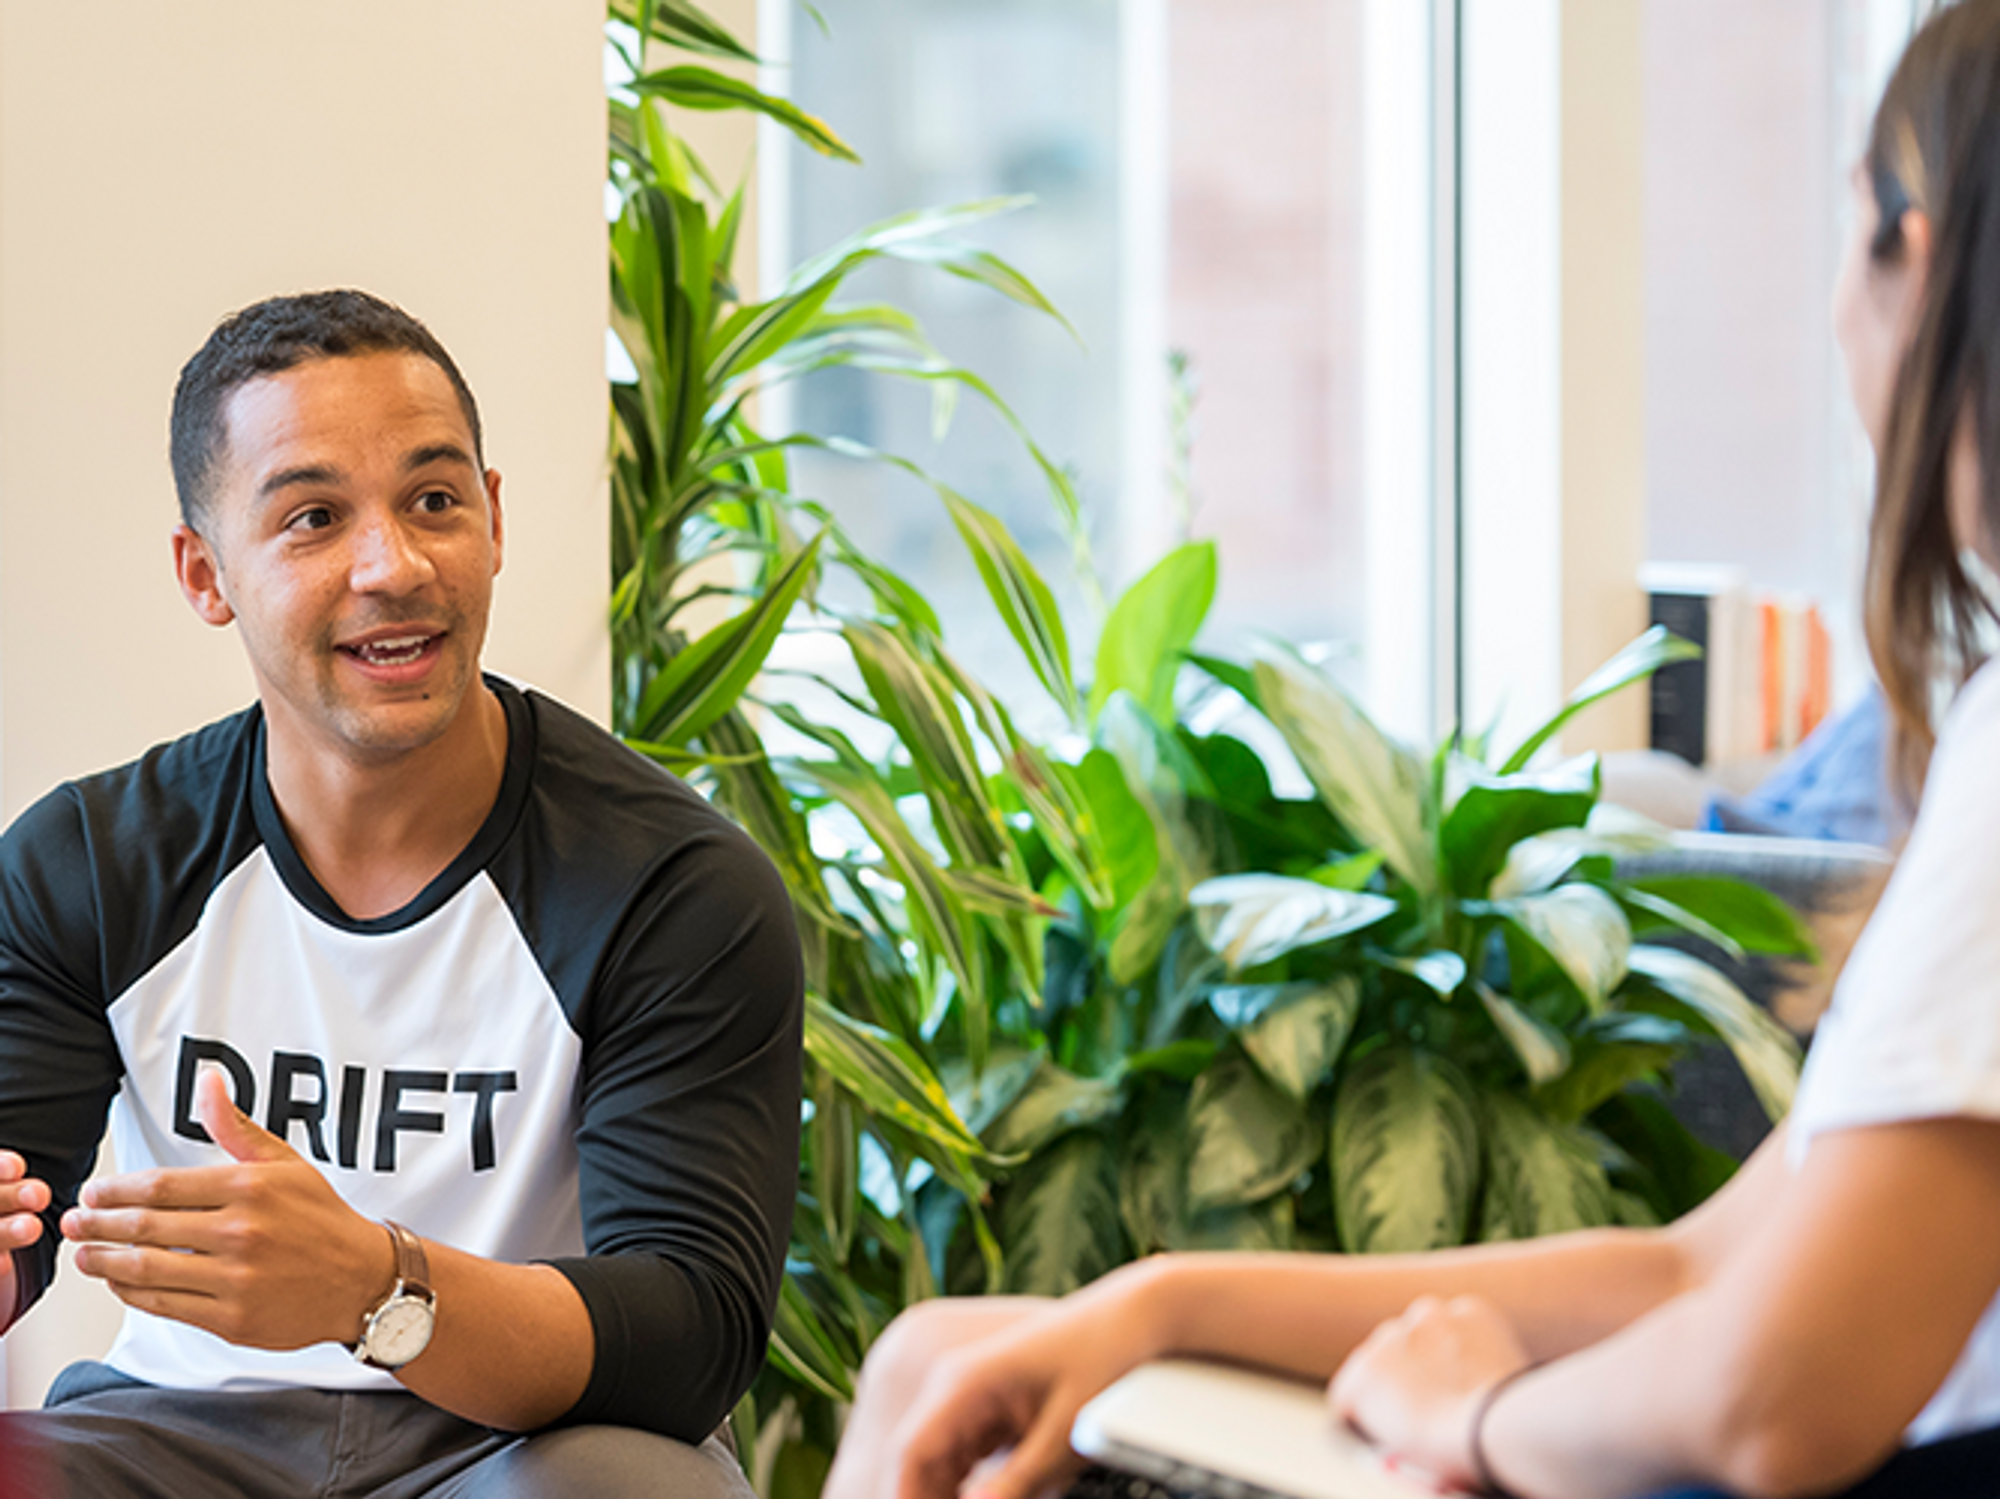 Teamwork and collaboration are at the center of the company culture at Drift.